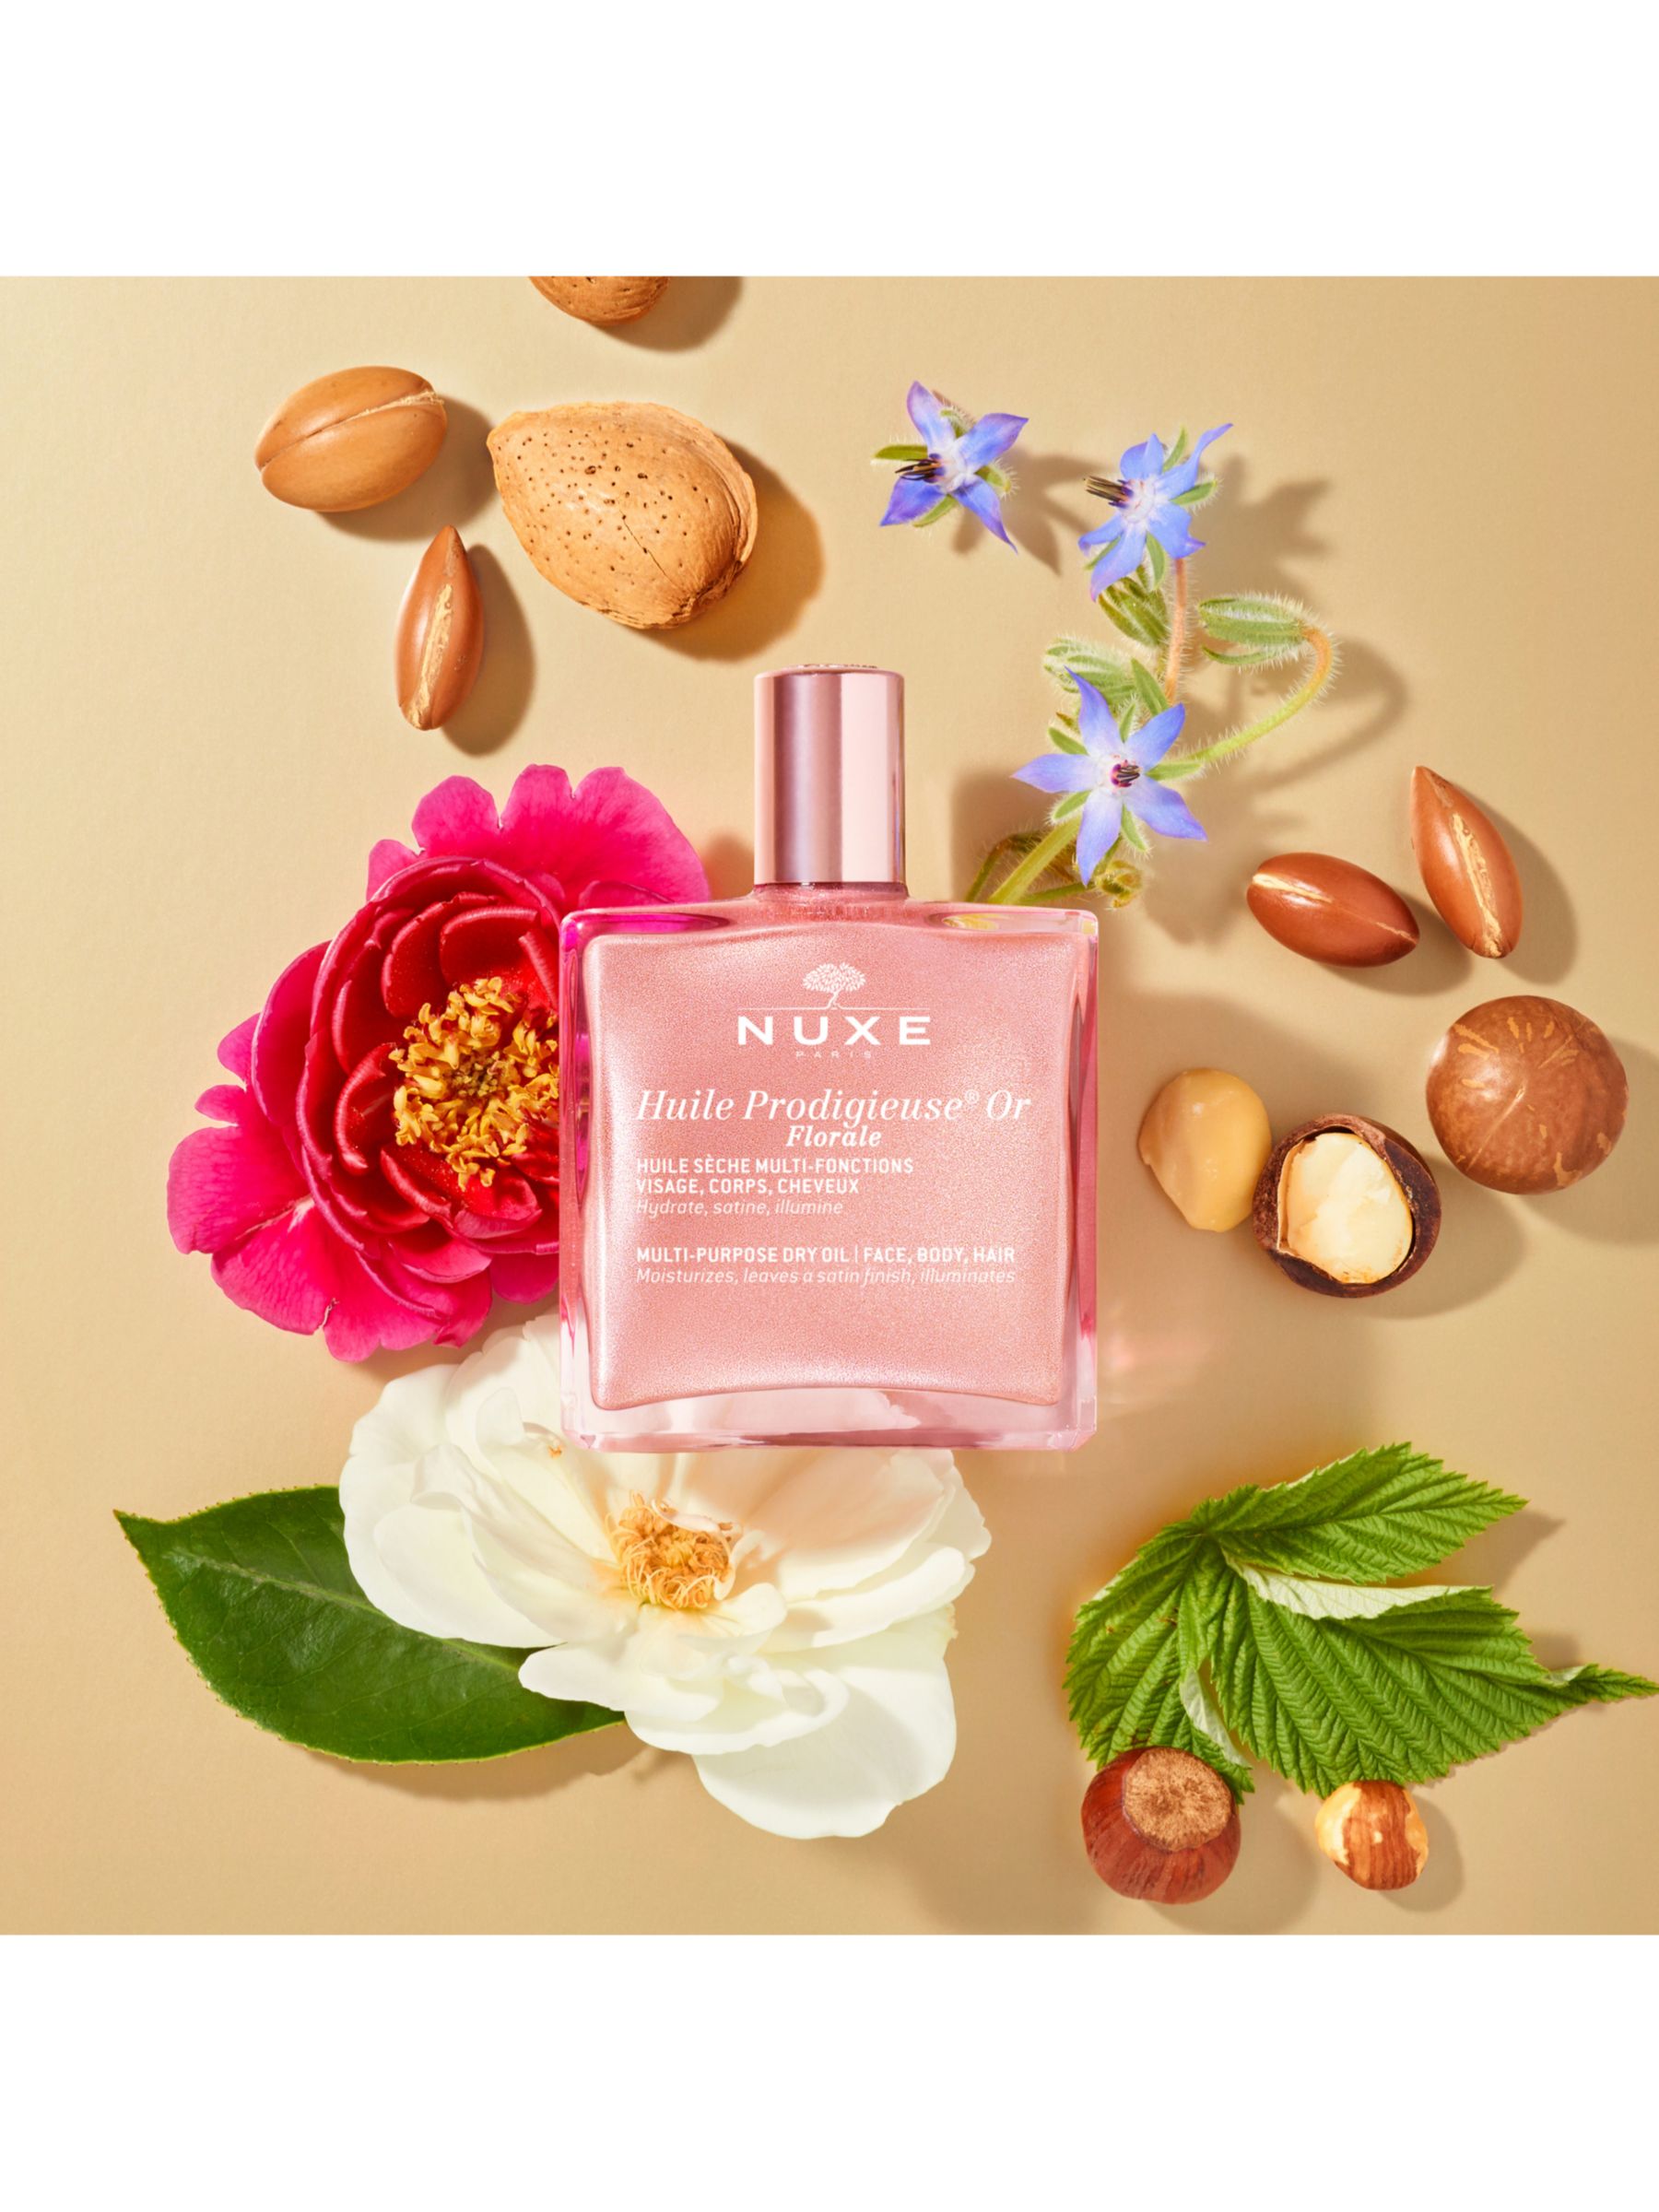 NUXE Huile Prodigieuse® Floral Gold Shimmer Multi-Purpose Dry Oil, 50ml 6